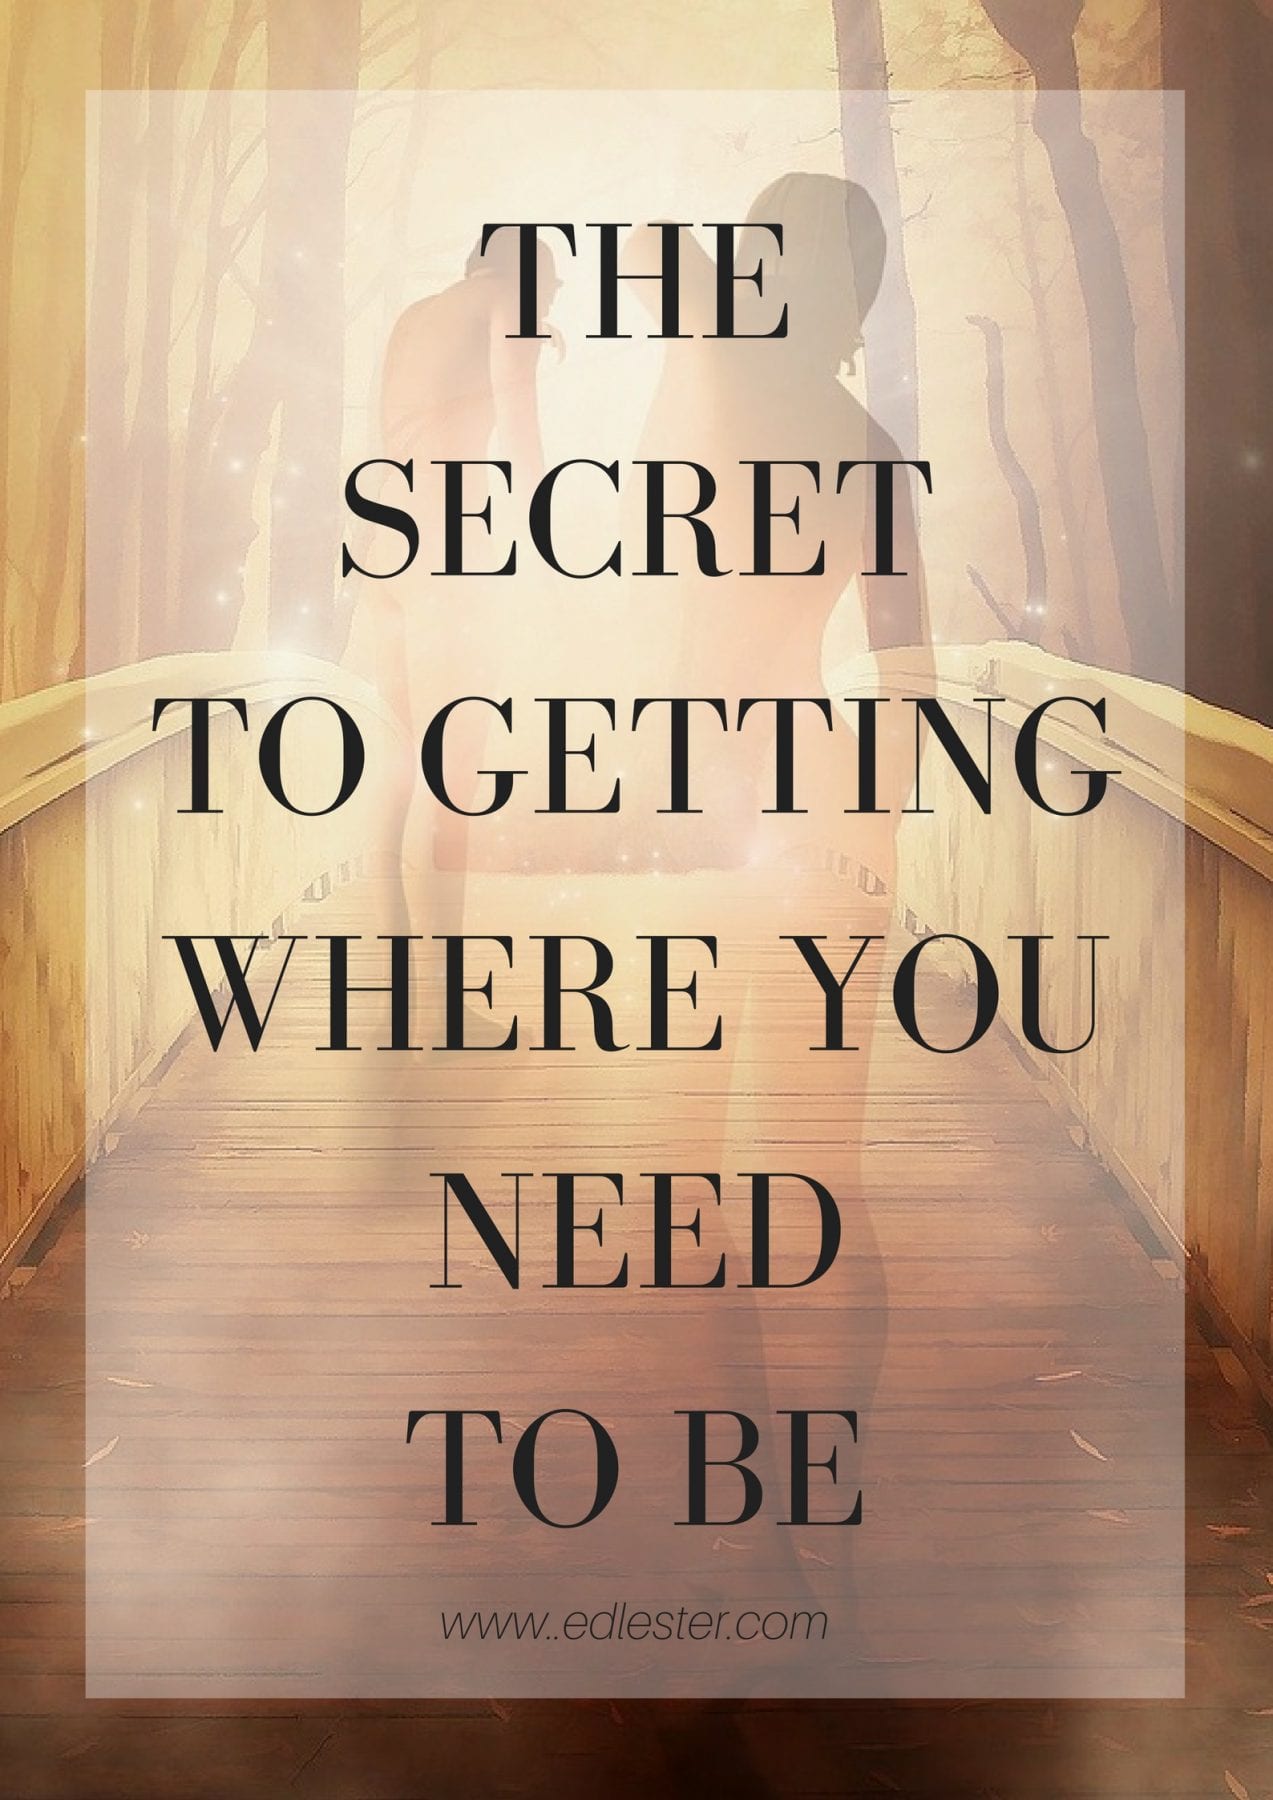 The Secret To Getting To Where You Want To Be